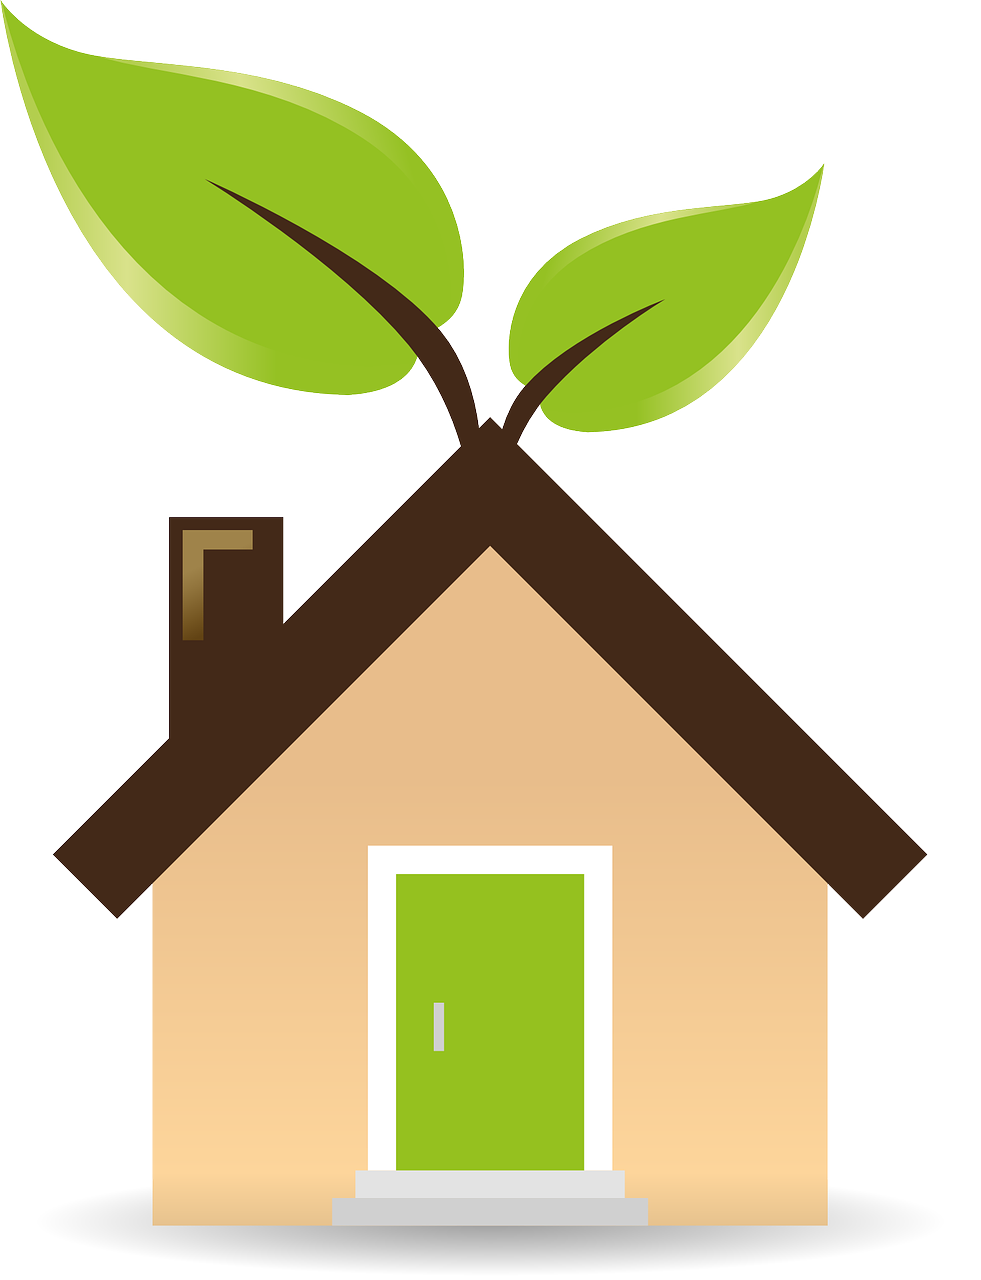 Why Should I Consider Buying A Green Home